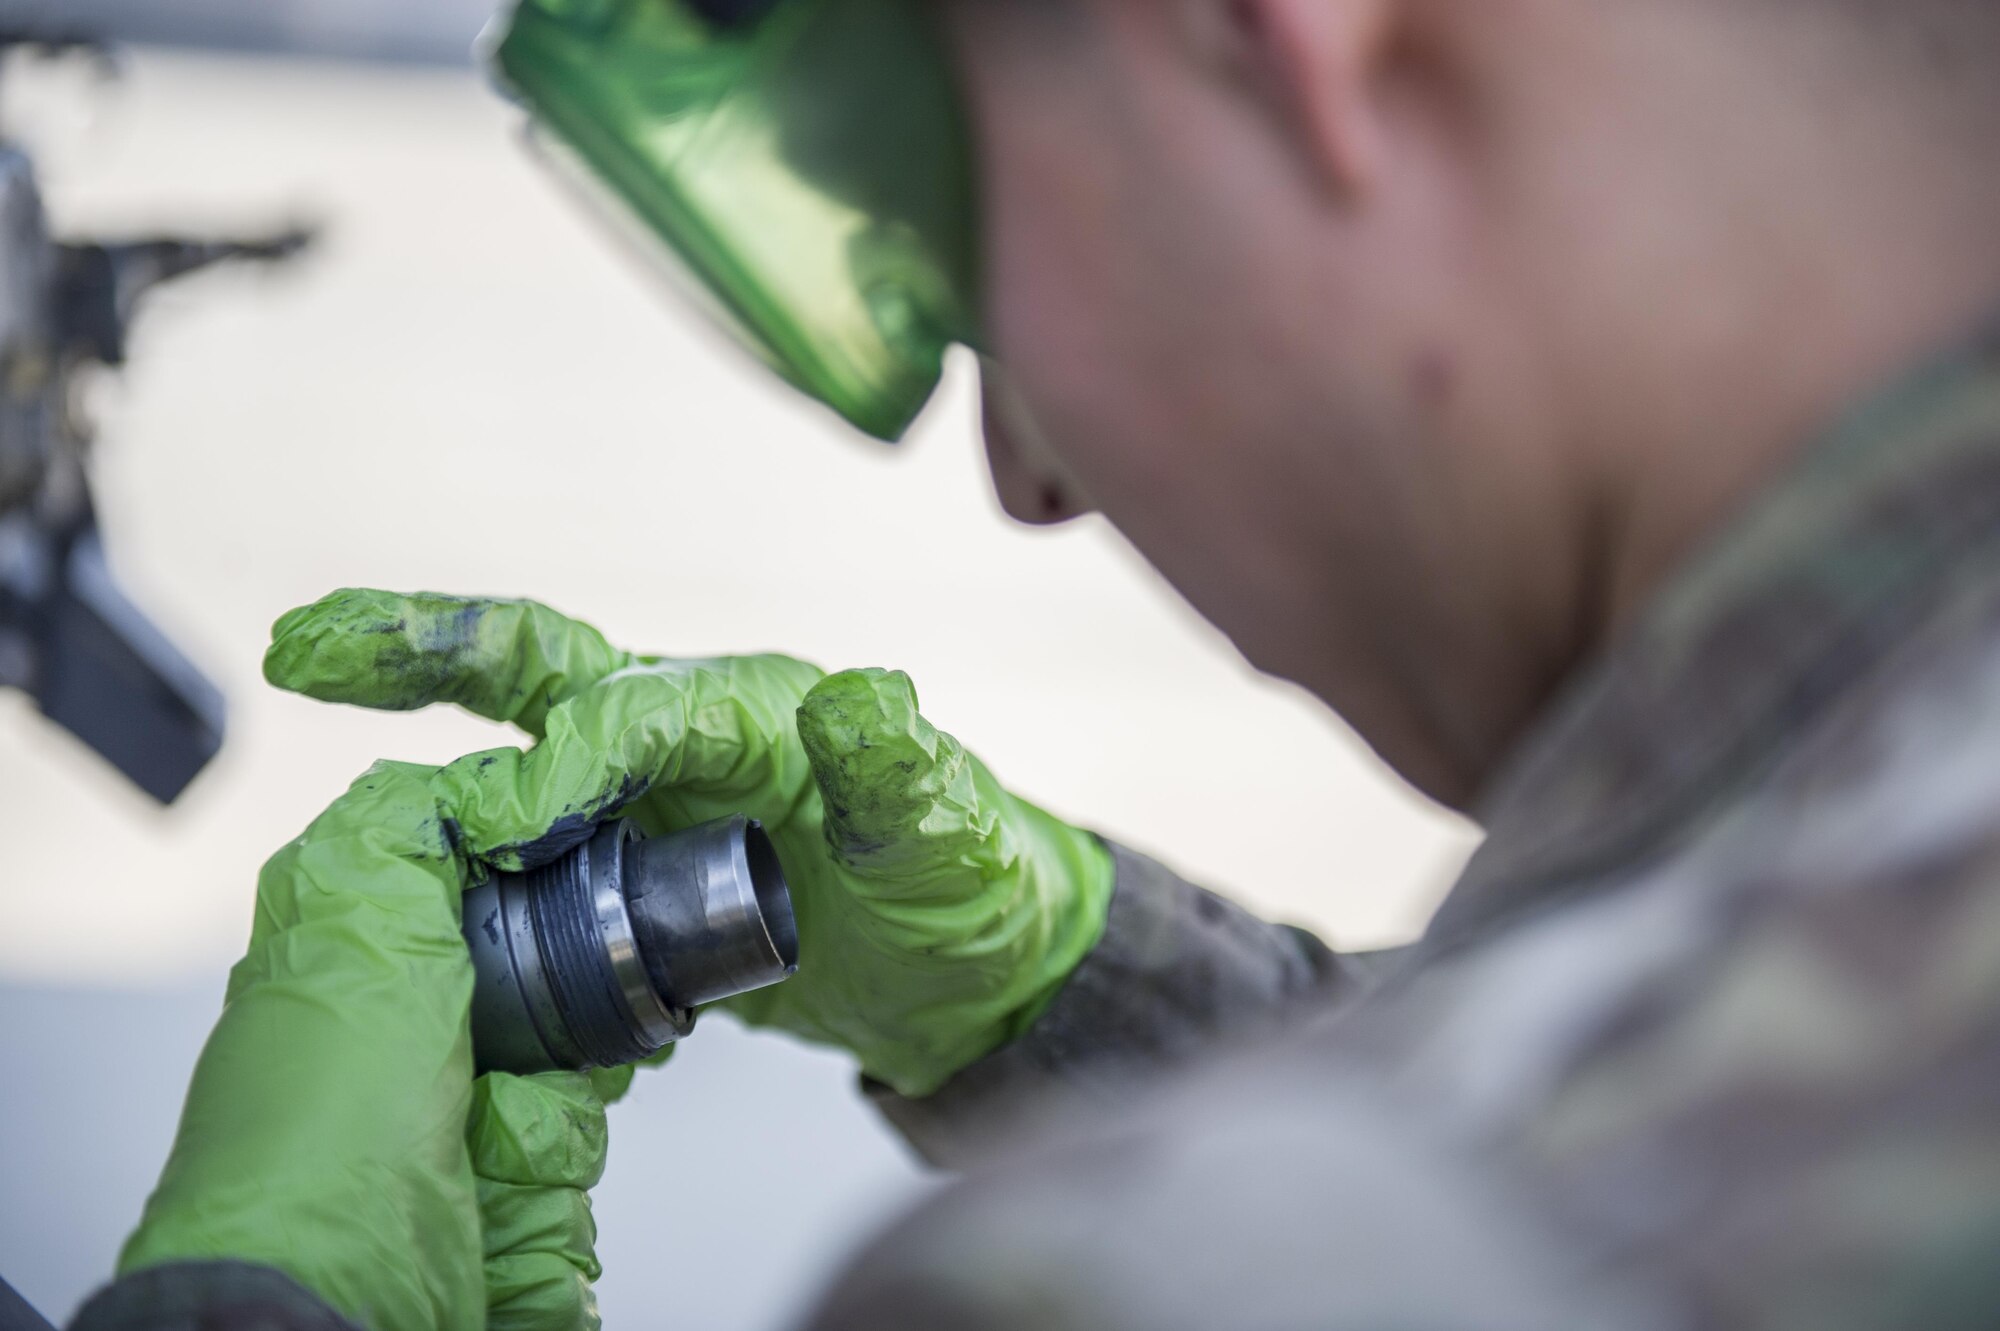 Airman 1st Class Gabriel Rey, 455th Expeditionary Aircraft Maintenance Squadron weapons load crew member, lubricates an impulse cartridge retainer during a 30-day inspection at Bagram Airfield, Afghanistan, Jan. 15, 2016. The weapons team performs a critical role for the close air support mission, ensuring Fighting Falcon pilots have the correct and functional munitions to provide the air cover ground forces need. (U.S. Air Force photo/Tech. Sgt. Robert Cloys)